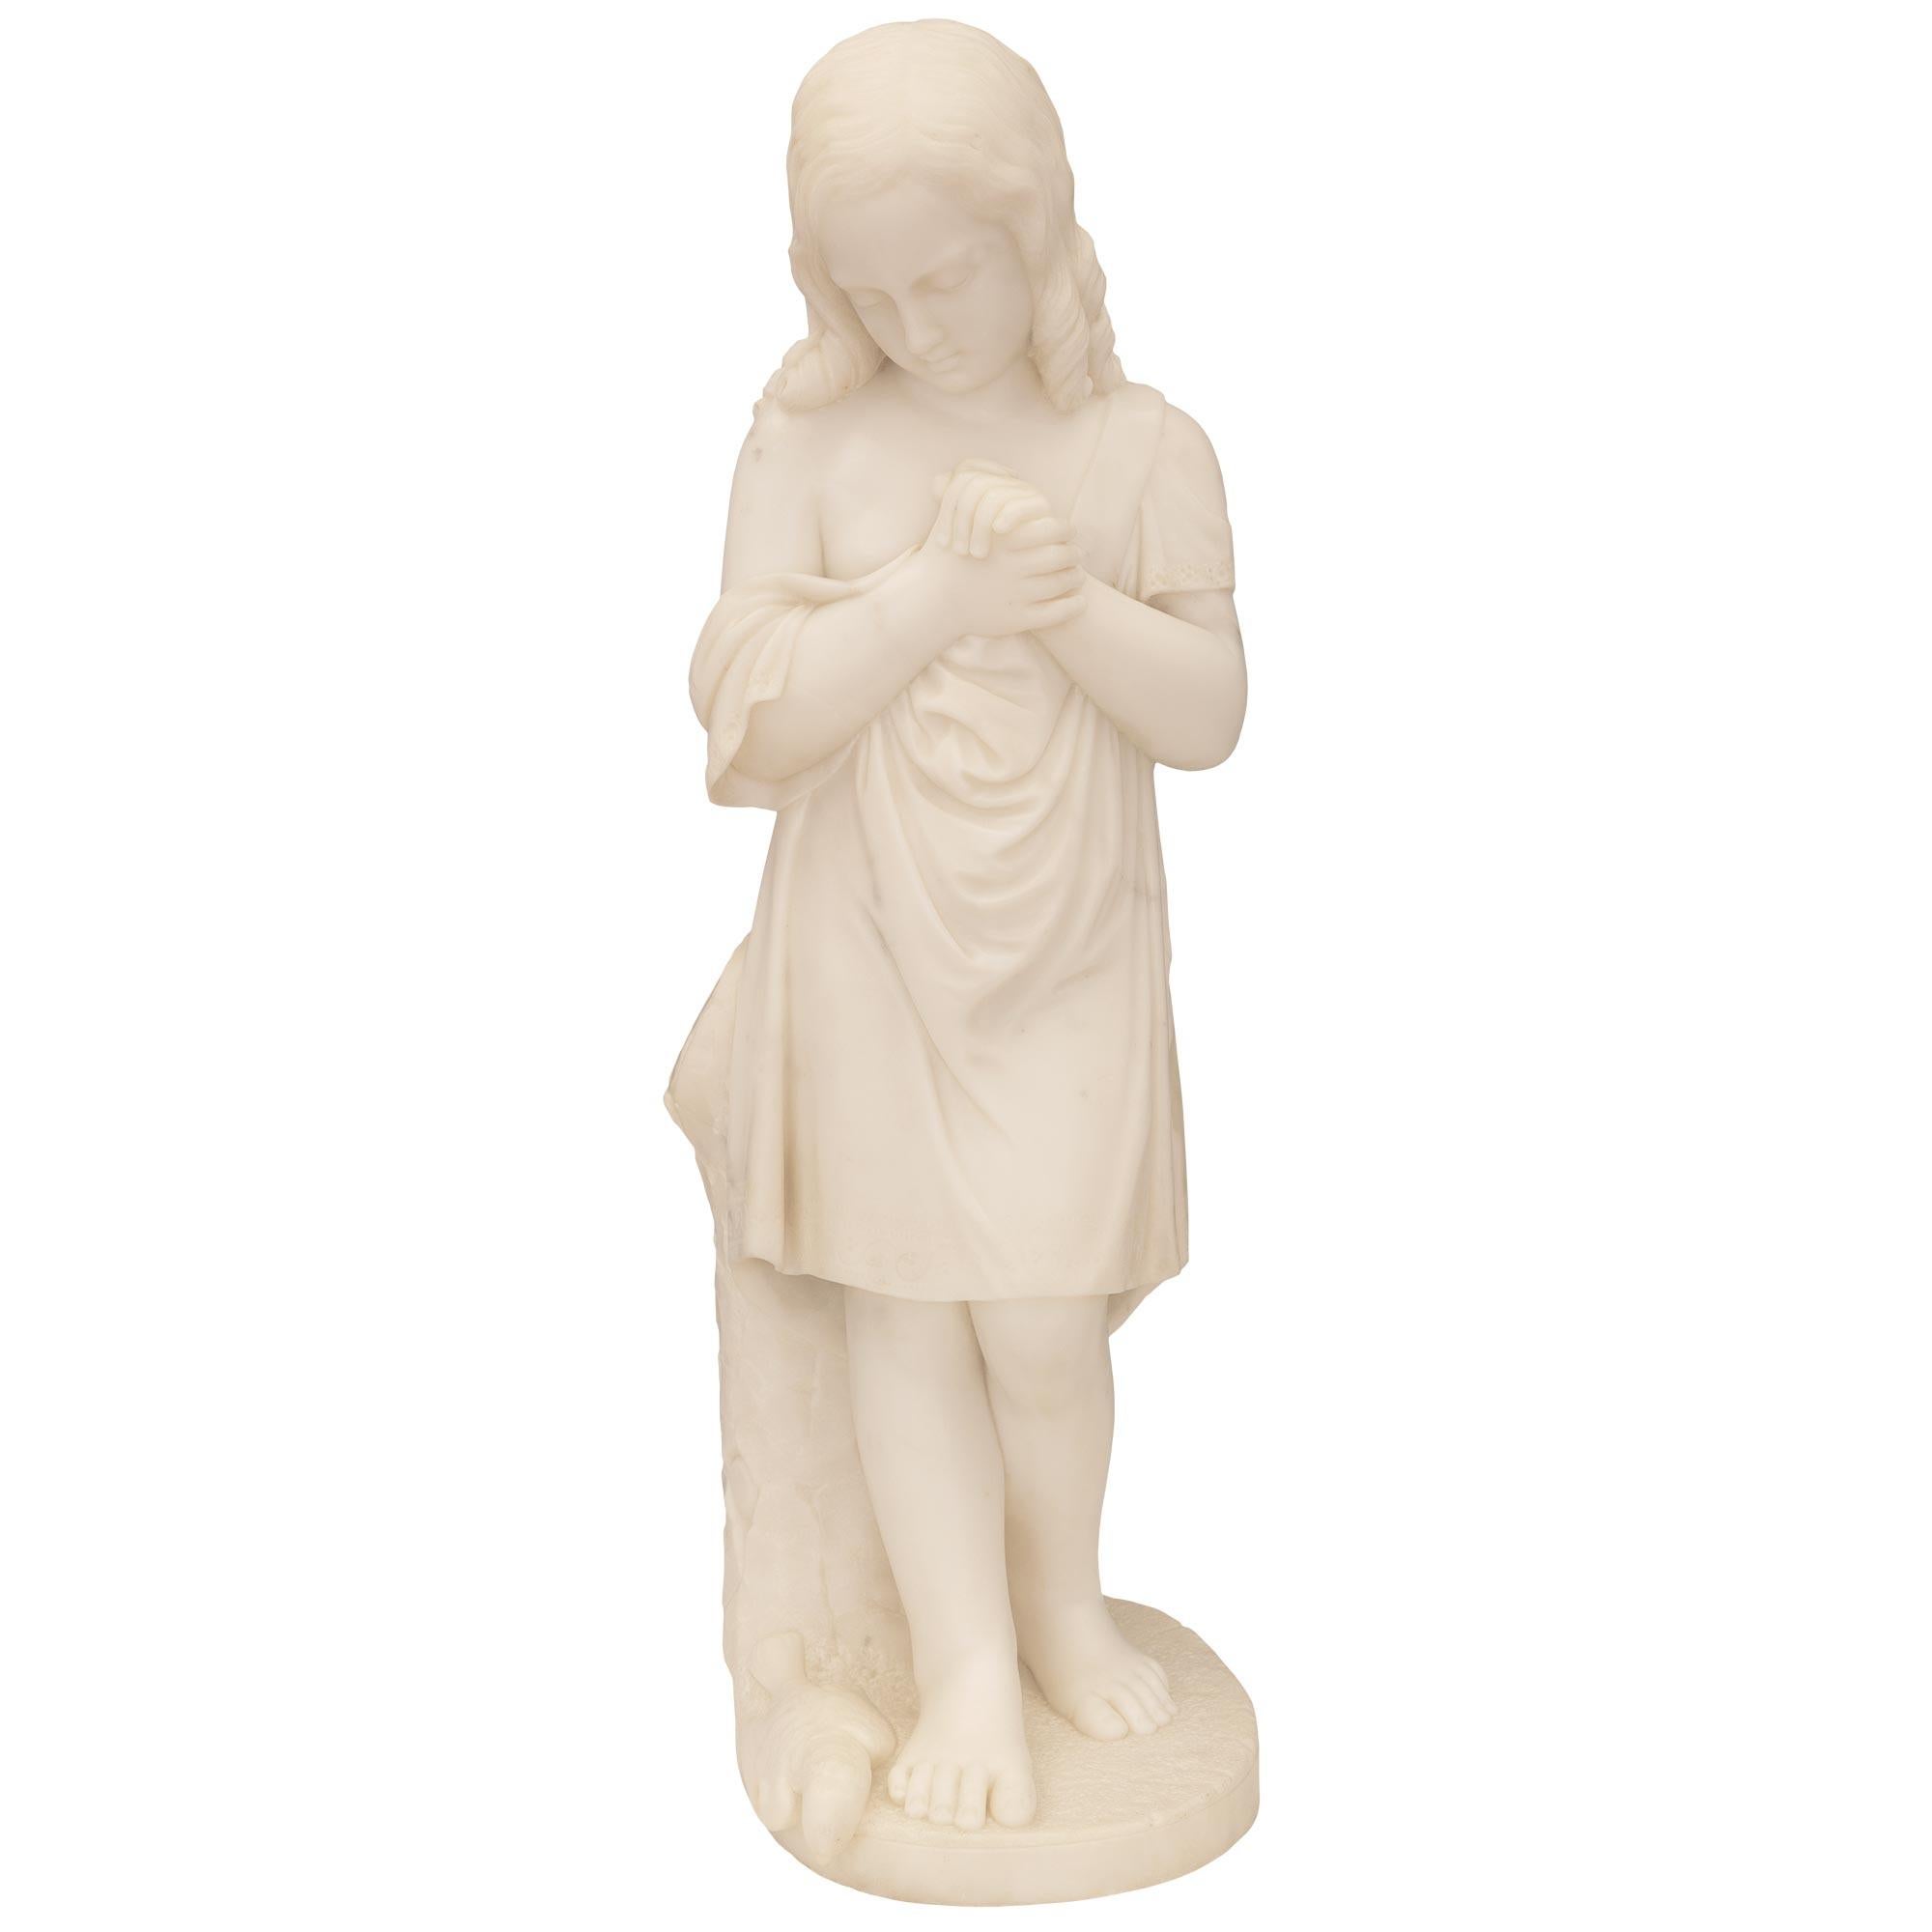 An exceptional Italian 19th century white Carrara marble statue. The statue depicts a young girl mourning the death of her pet bird. The statue is raised by an oblong base with a fine ground design where the fallen bird lays at the girl's feet and